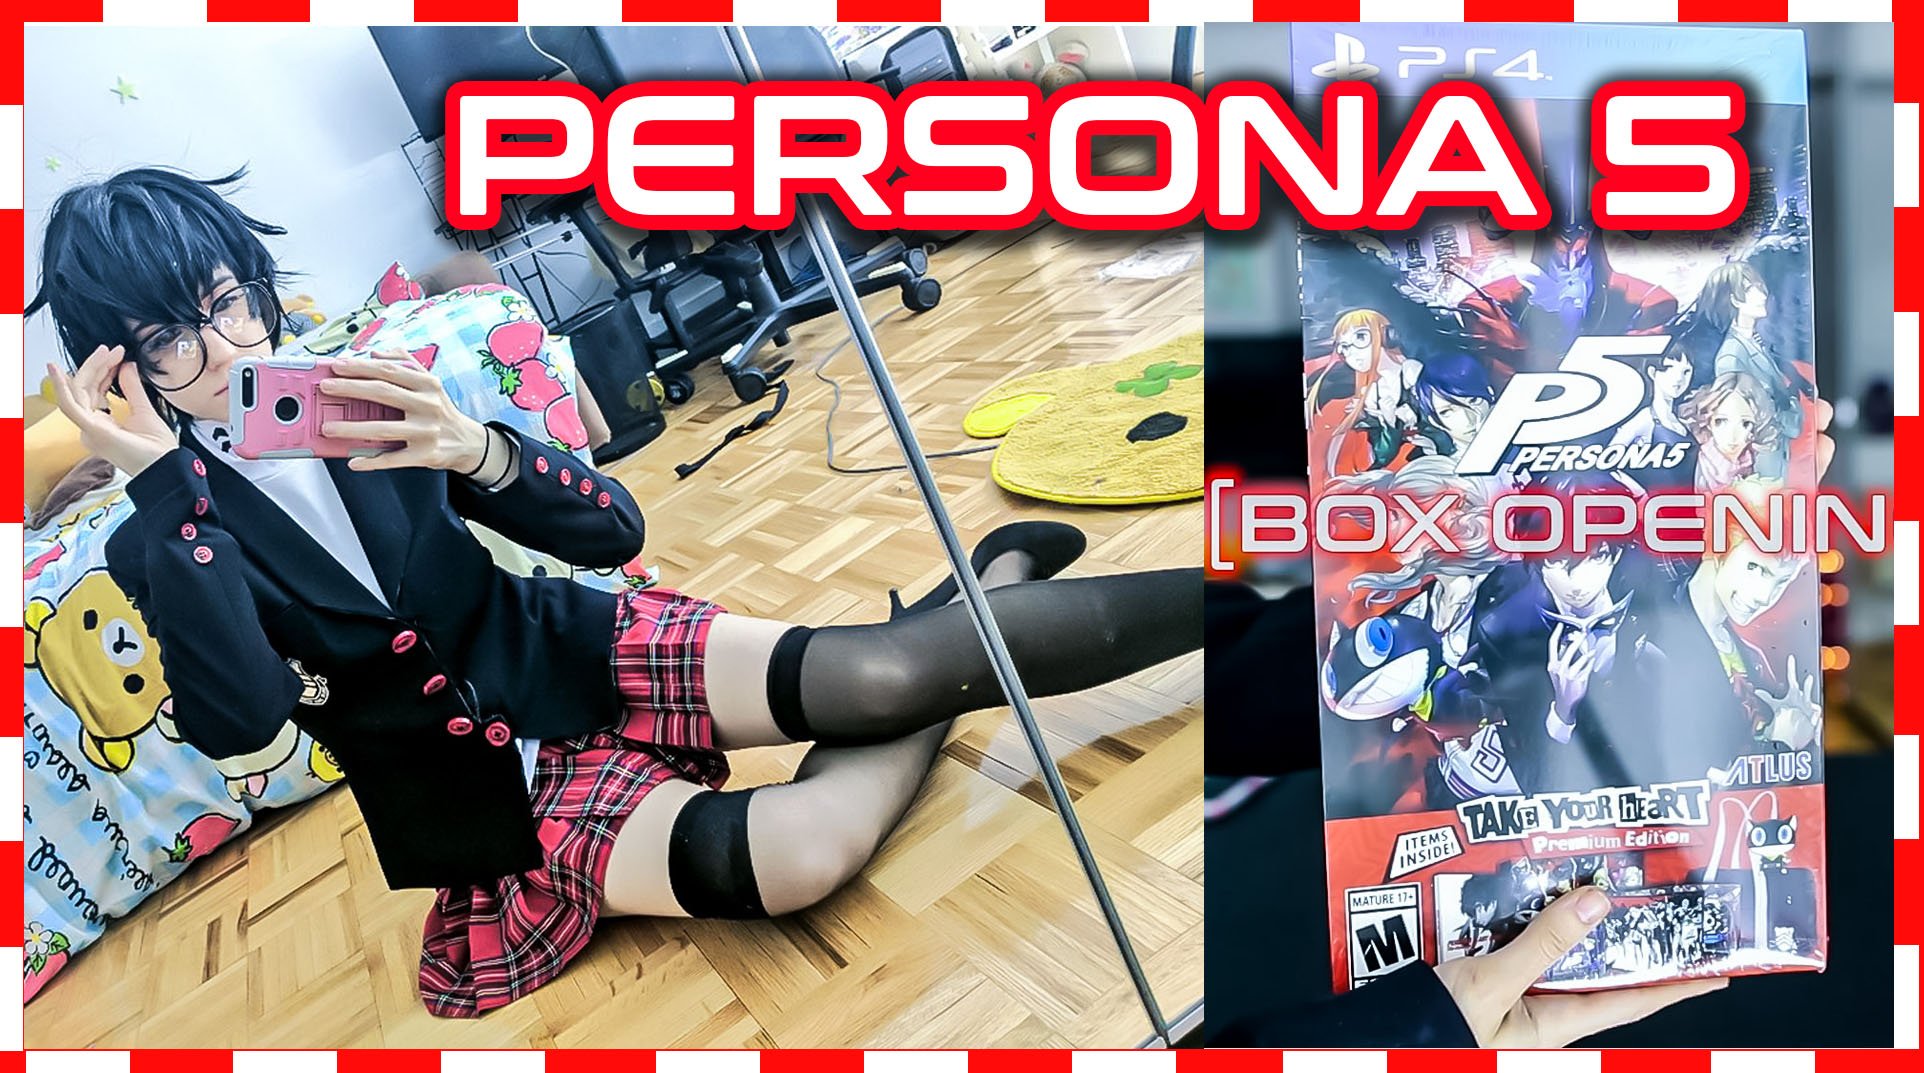 Lana Rain TV on X: t.coUhWNRgC2Bc PERSONA 5 Take Your Heart  collector's edition UNBOXING! + Female Akira Kurusu cosplay!  t.coJzR9w119lM  X